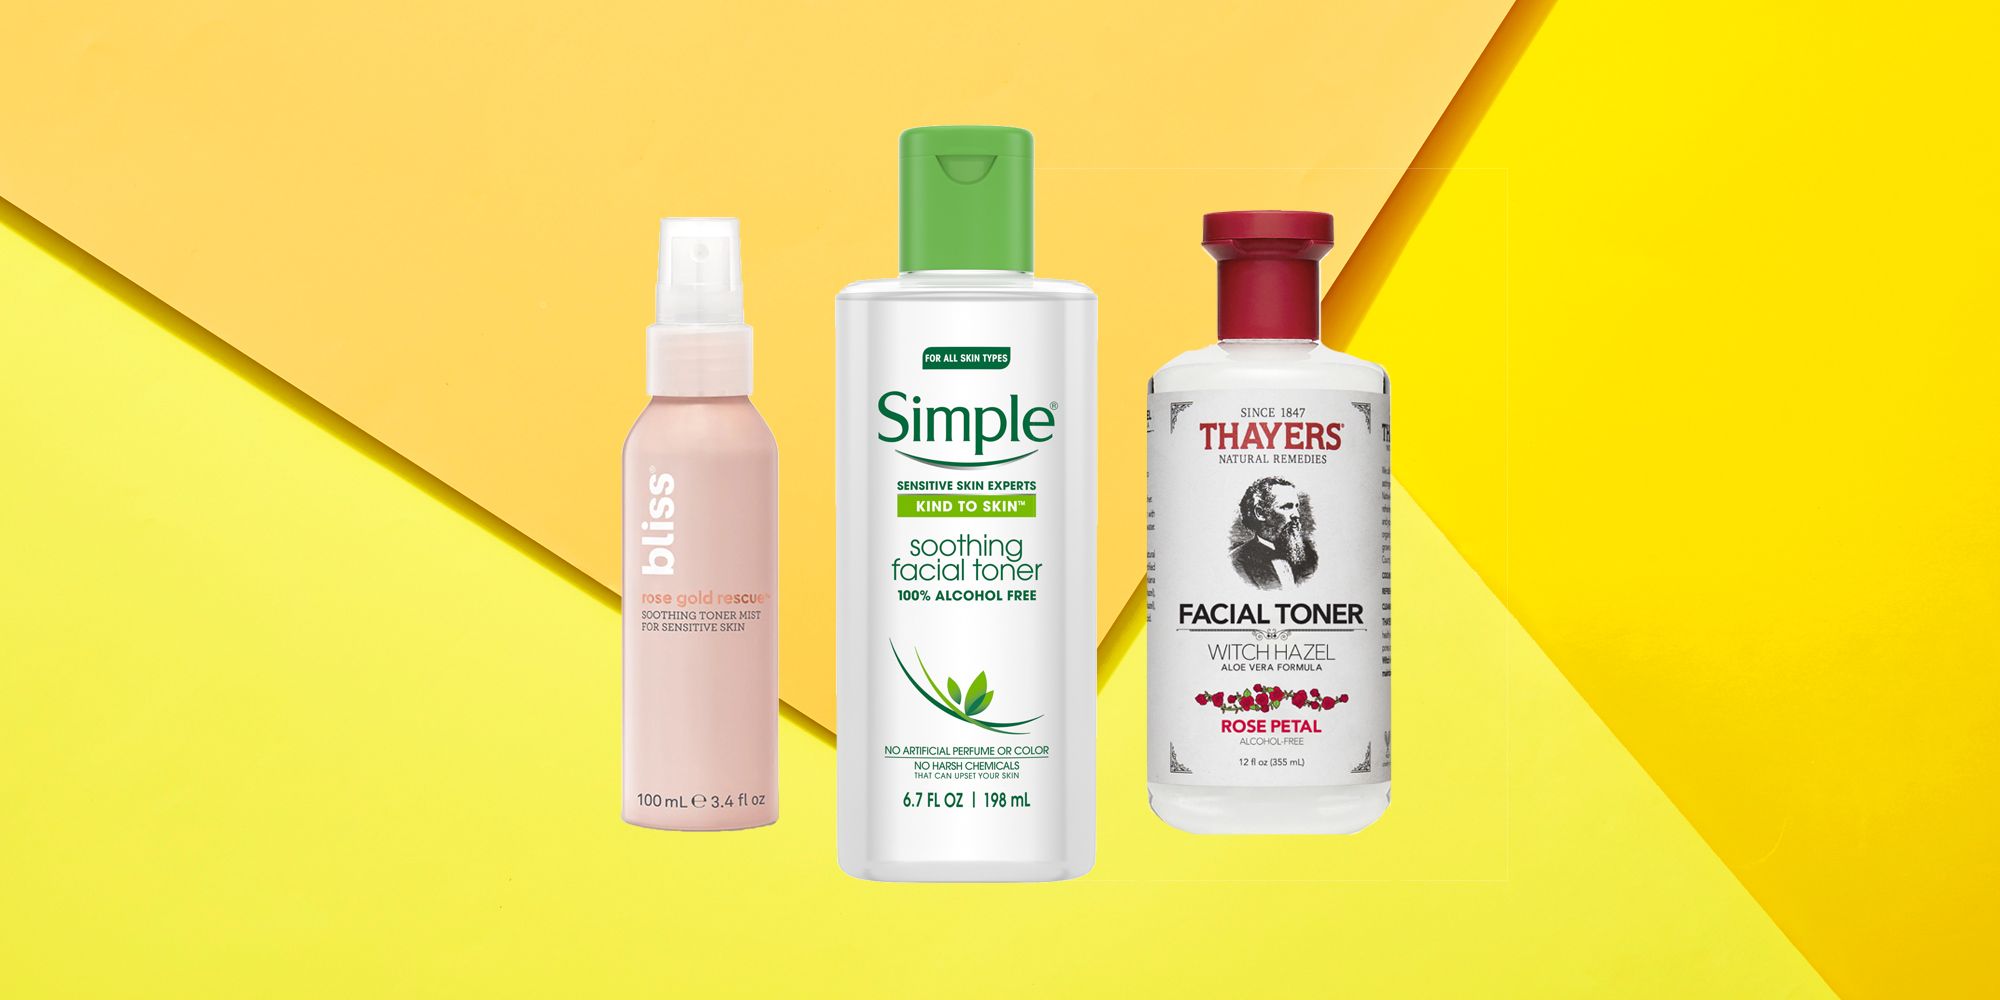 15 Best Drugstore Toners 2020 - Cheap Toners For Great Skin